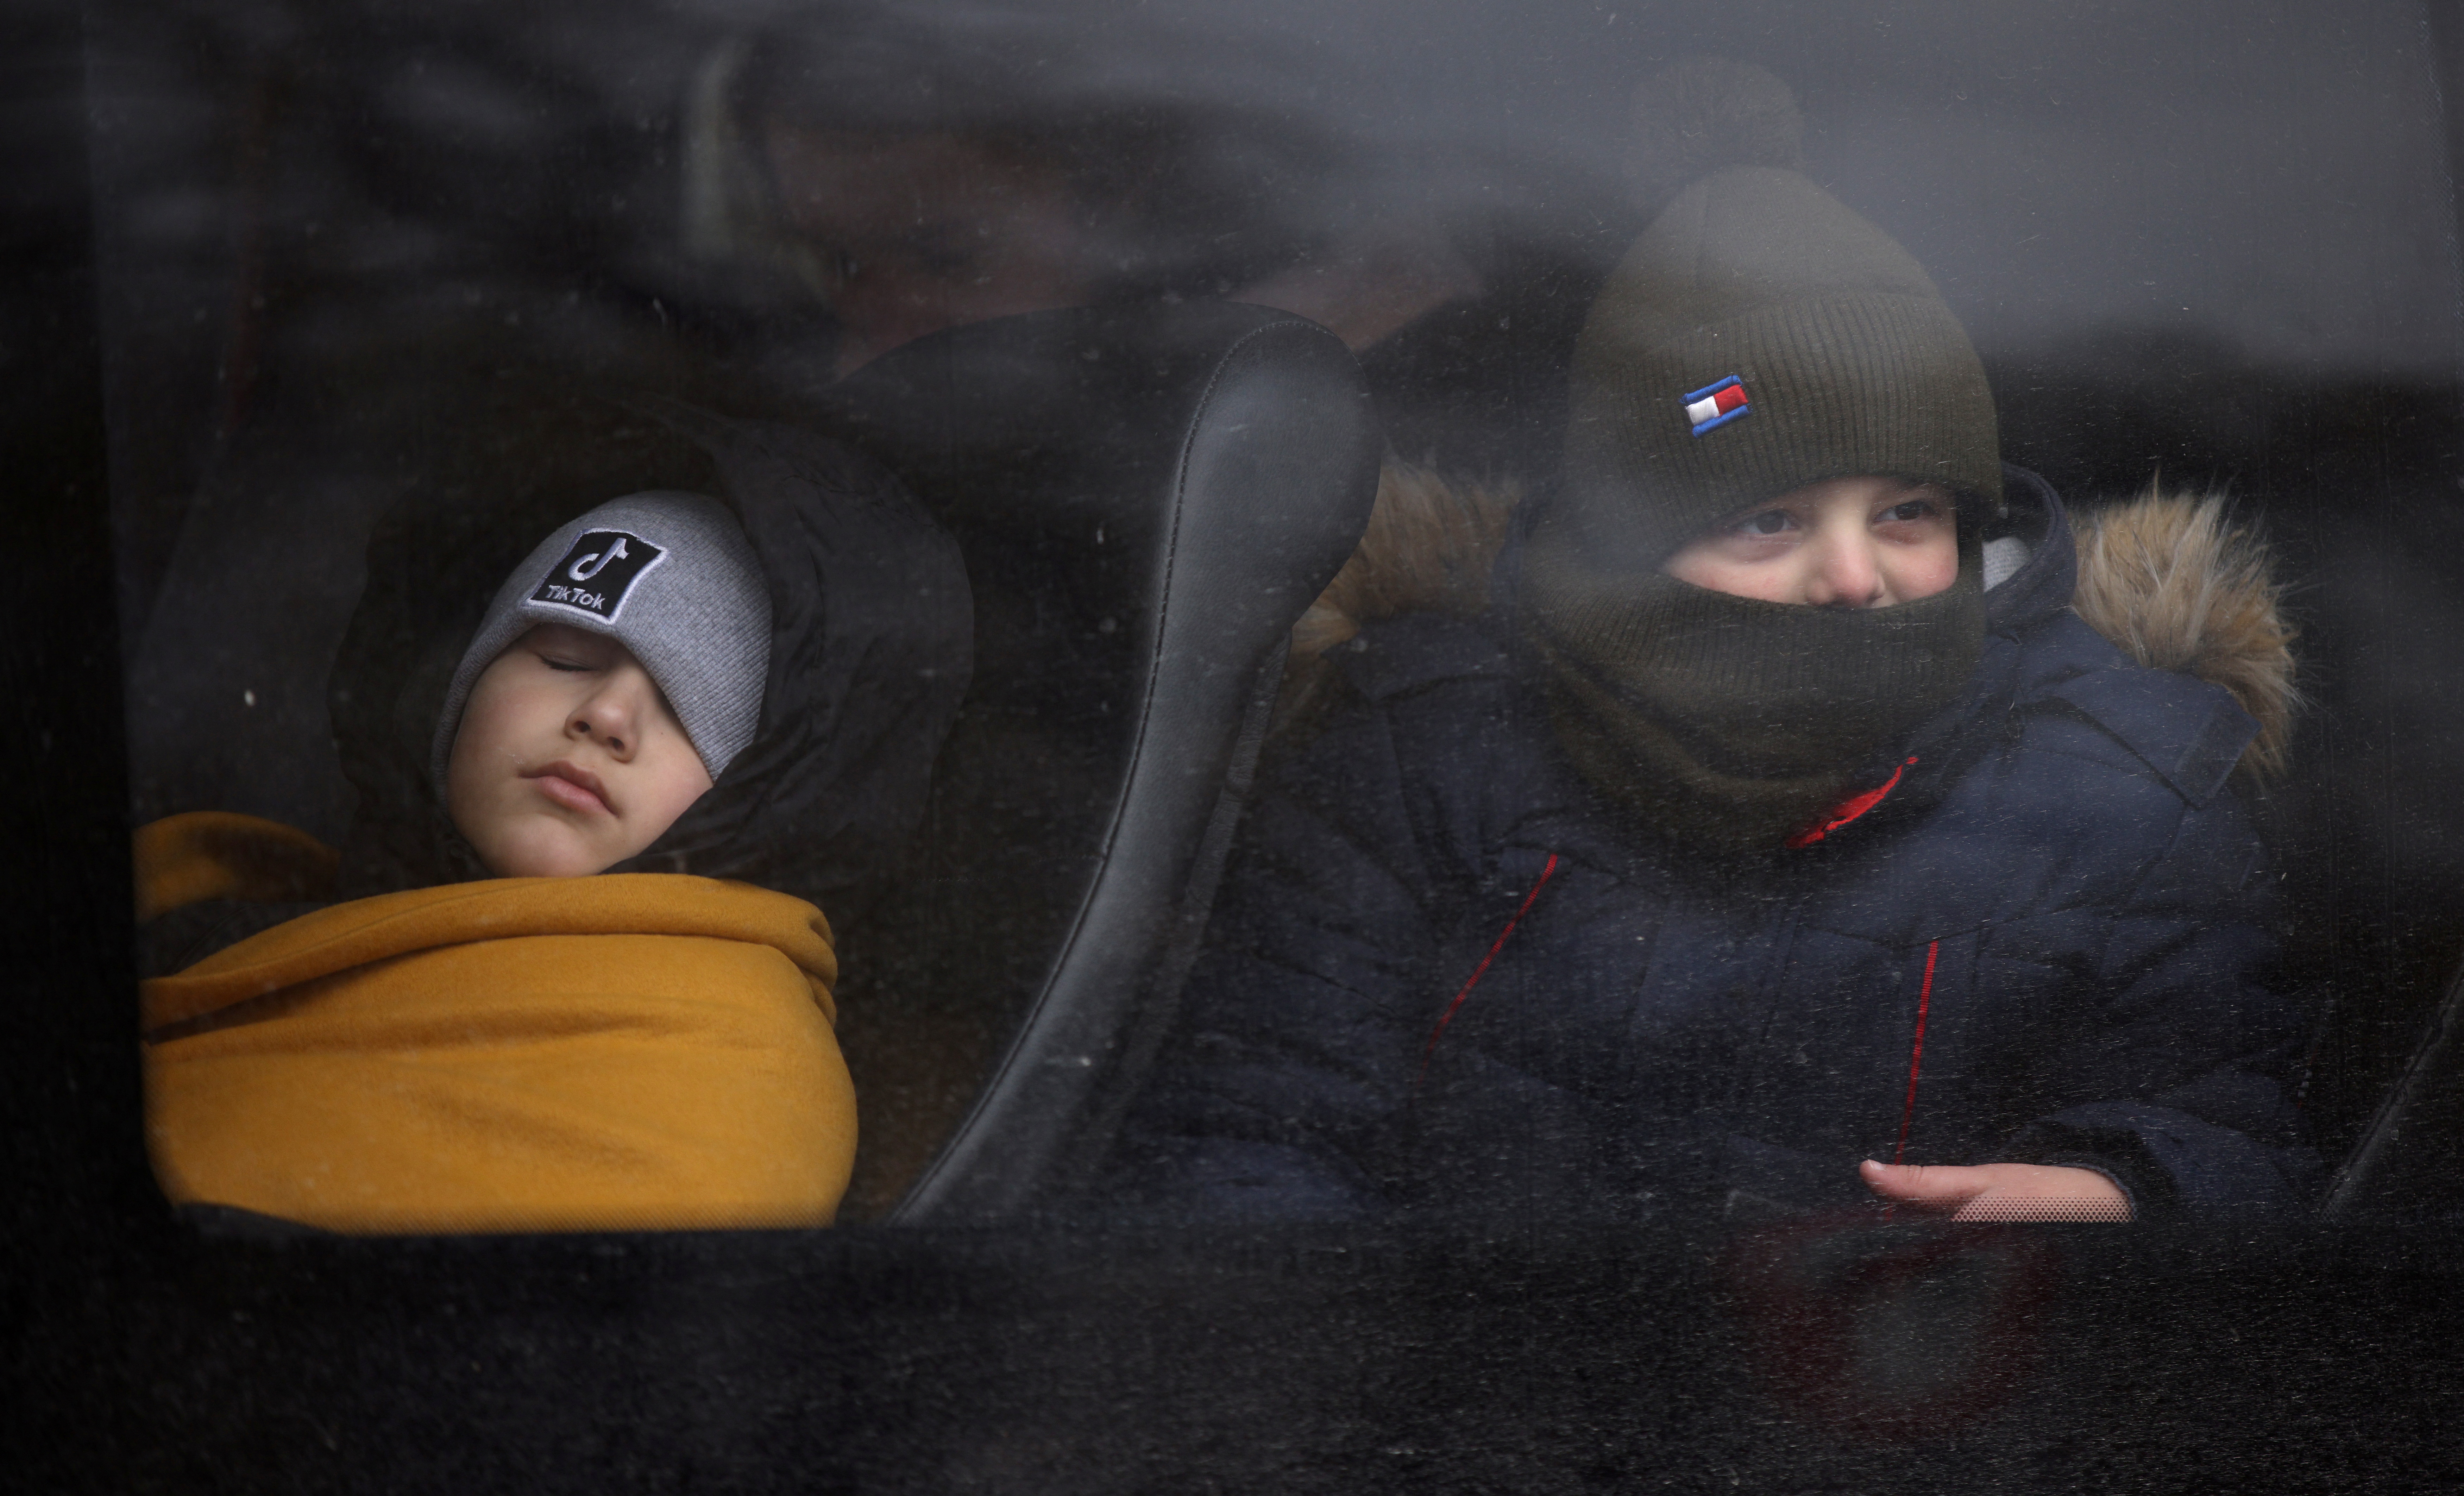 Children board a bus after fleeing from Russia's invasion of Ukraine, at the border crossing in Siret, Romania, February 28, 2022. REUTERS/Stoyan Nenov